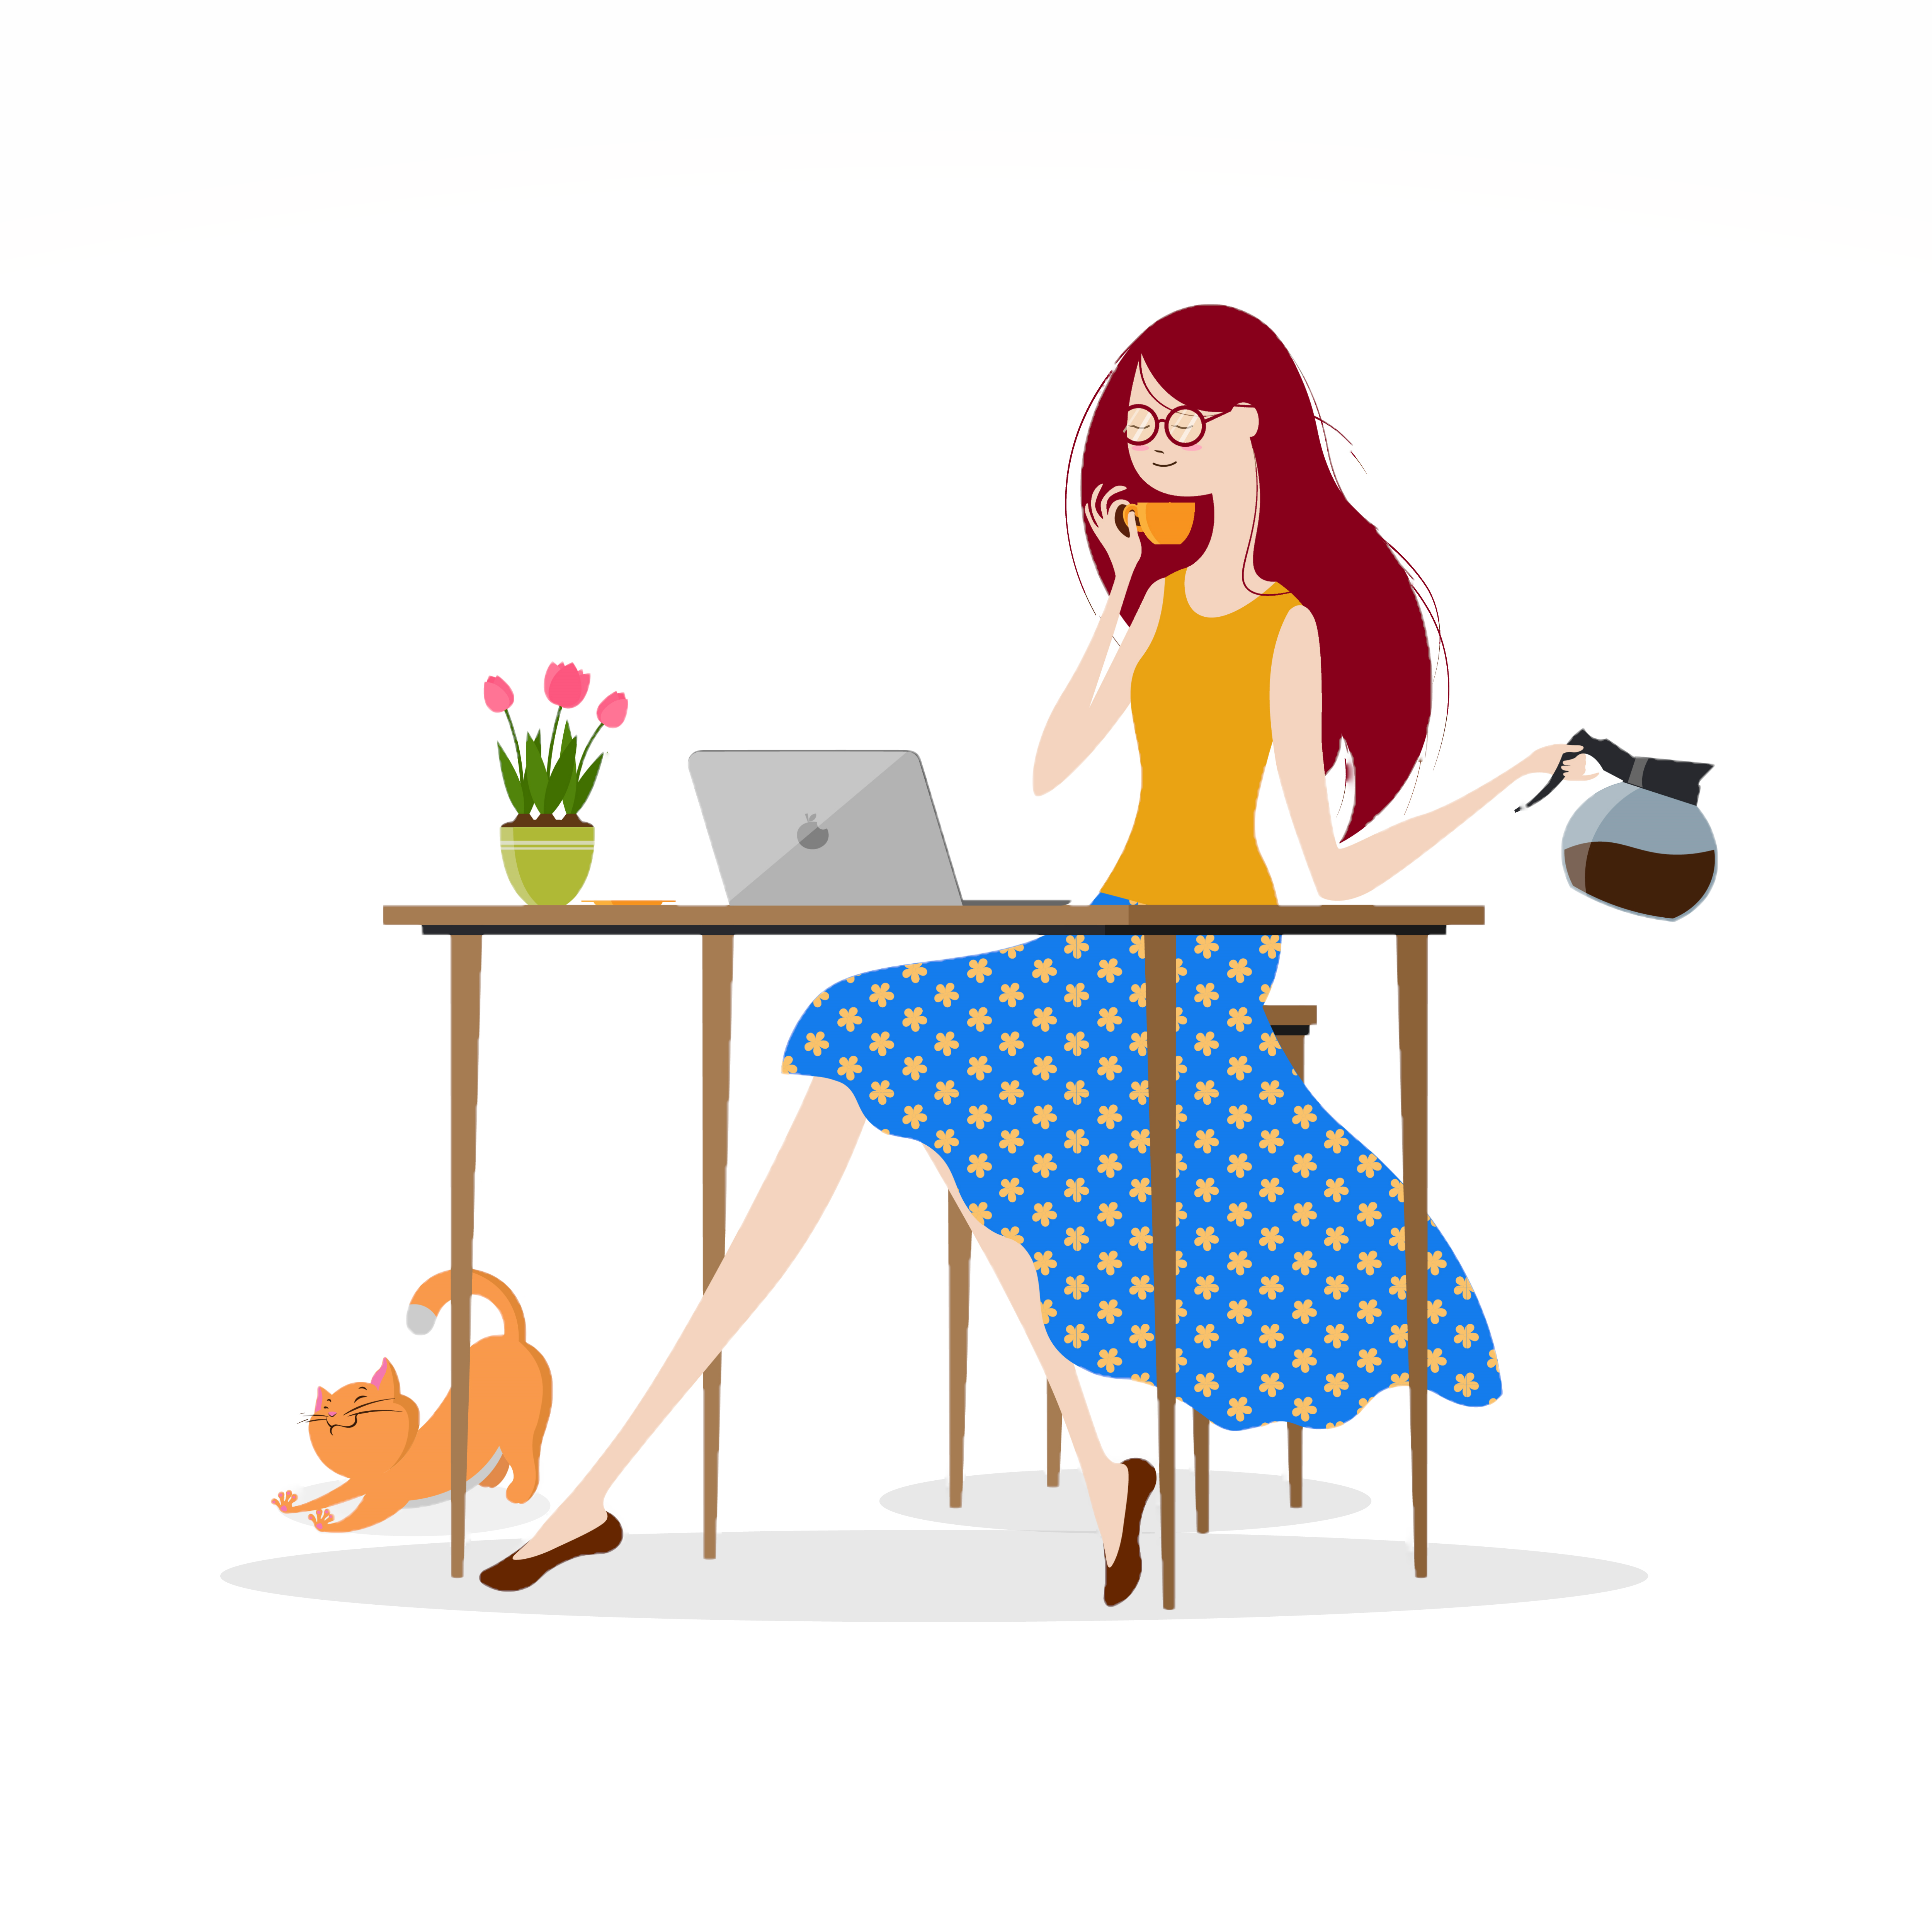 A red head women drinking coffee 
       using a computer with a cat under foot